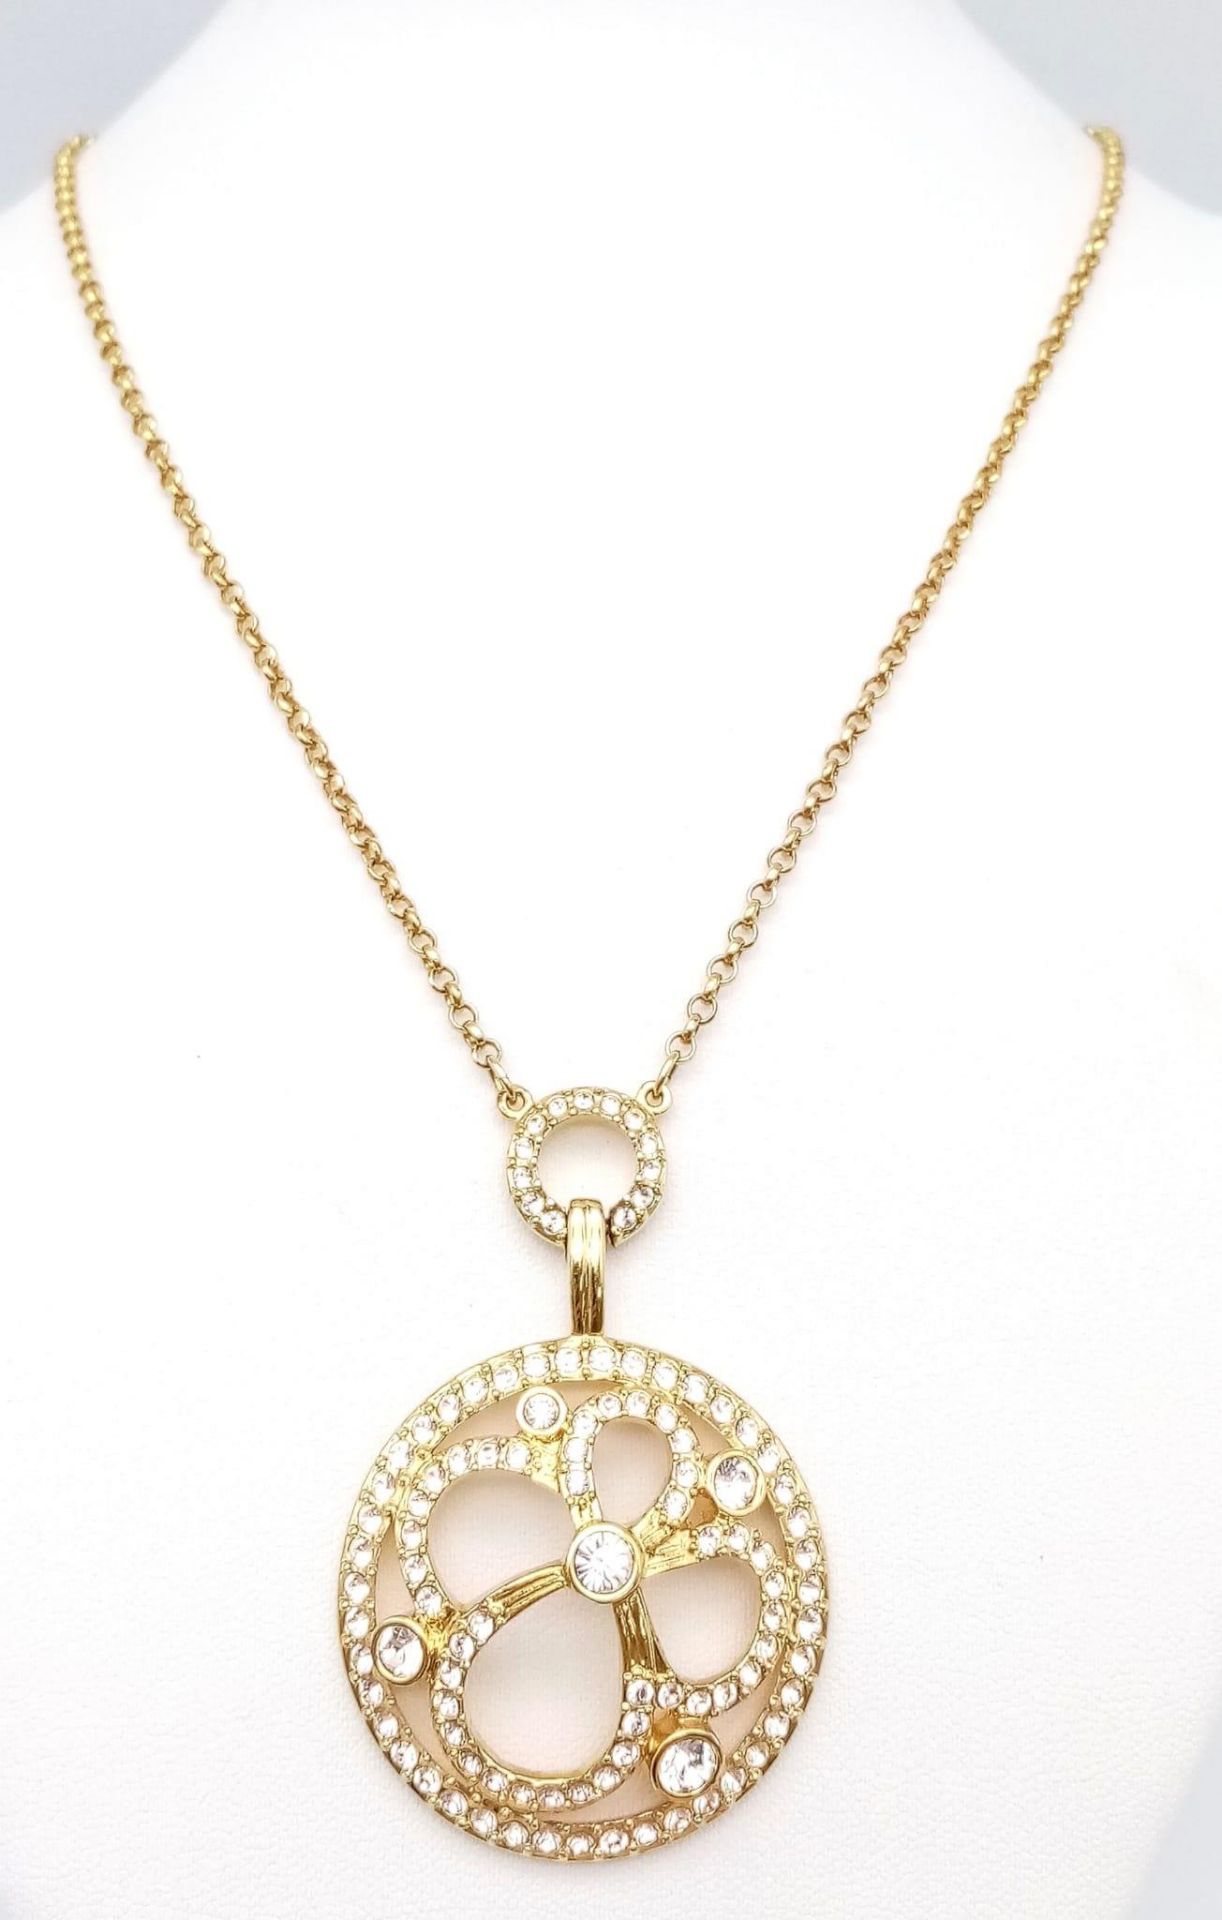 A Swarovski Gilded Necklace and Pendant with White Stone Decoration. - Image 3 of 8